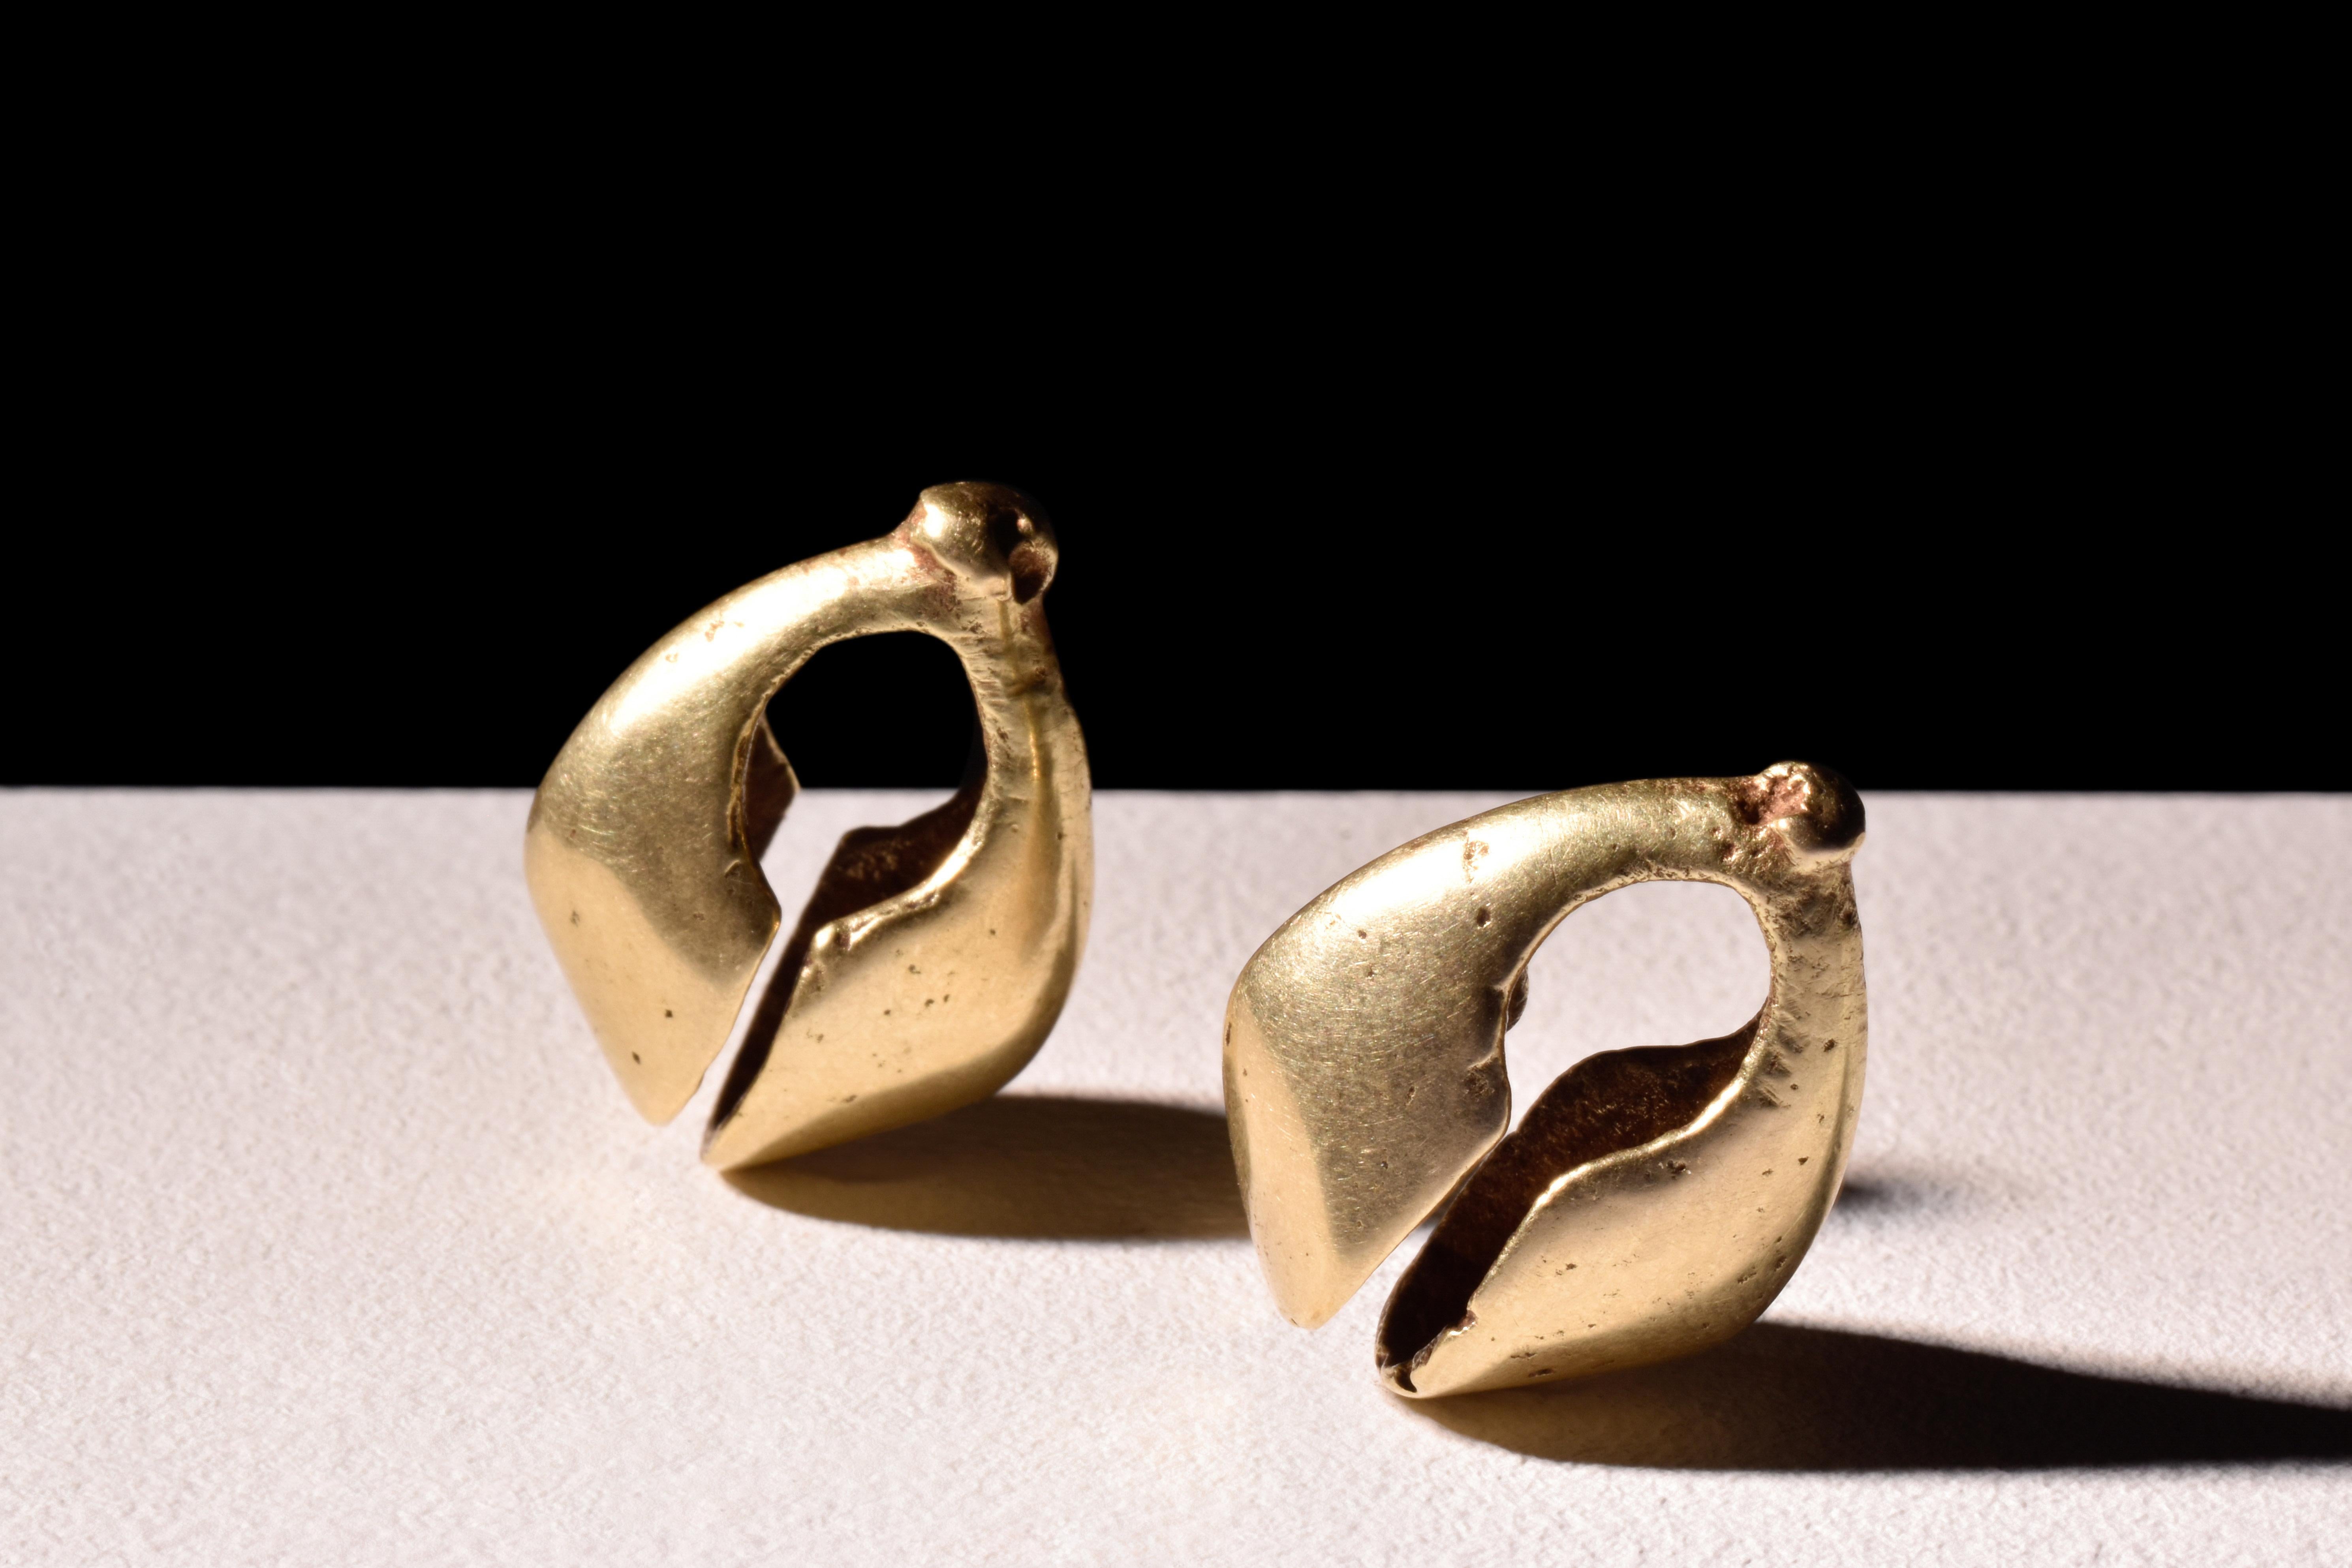 A Bronze Age, matched pair of gold earrings. Each piece is characterised by hollow-formed construction. The terminals of these earrings expand gracefully, while central bulges with perforations imbue the design with an additional element of